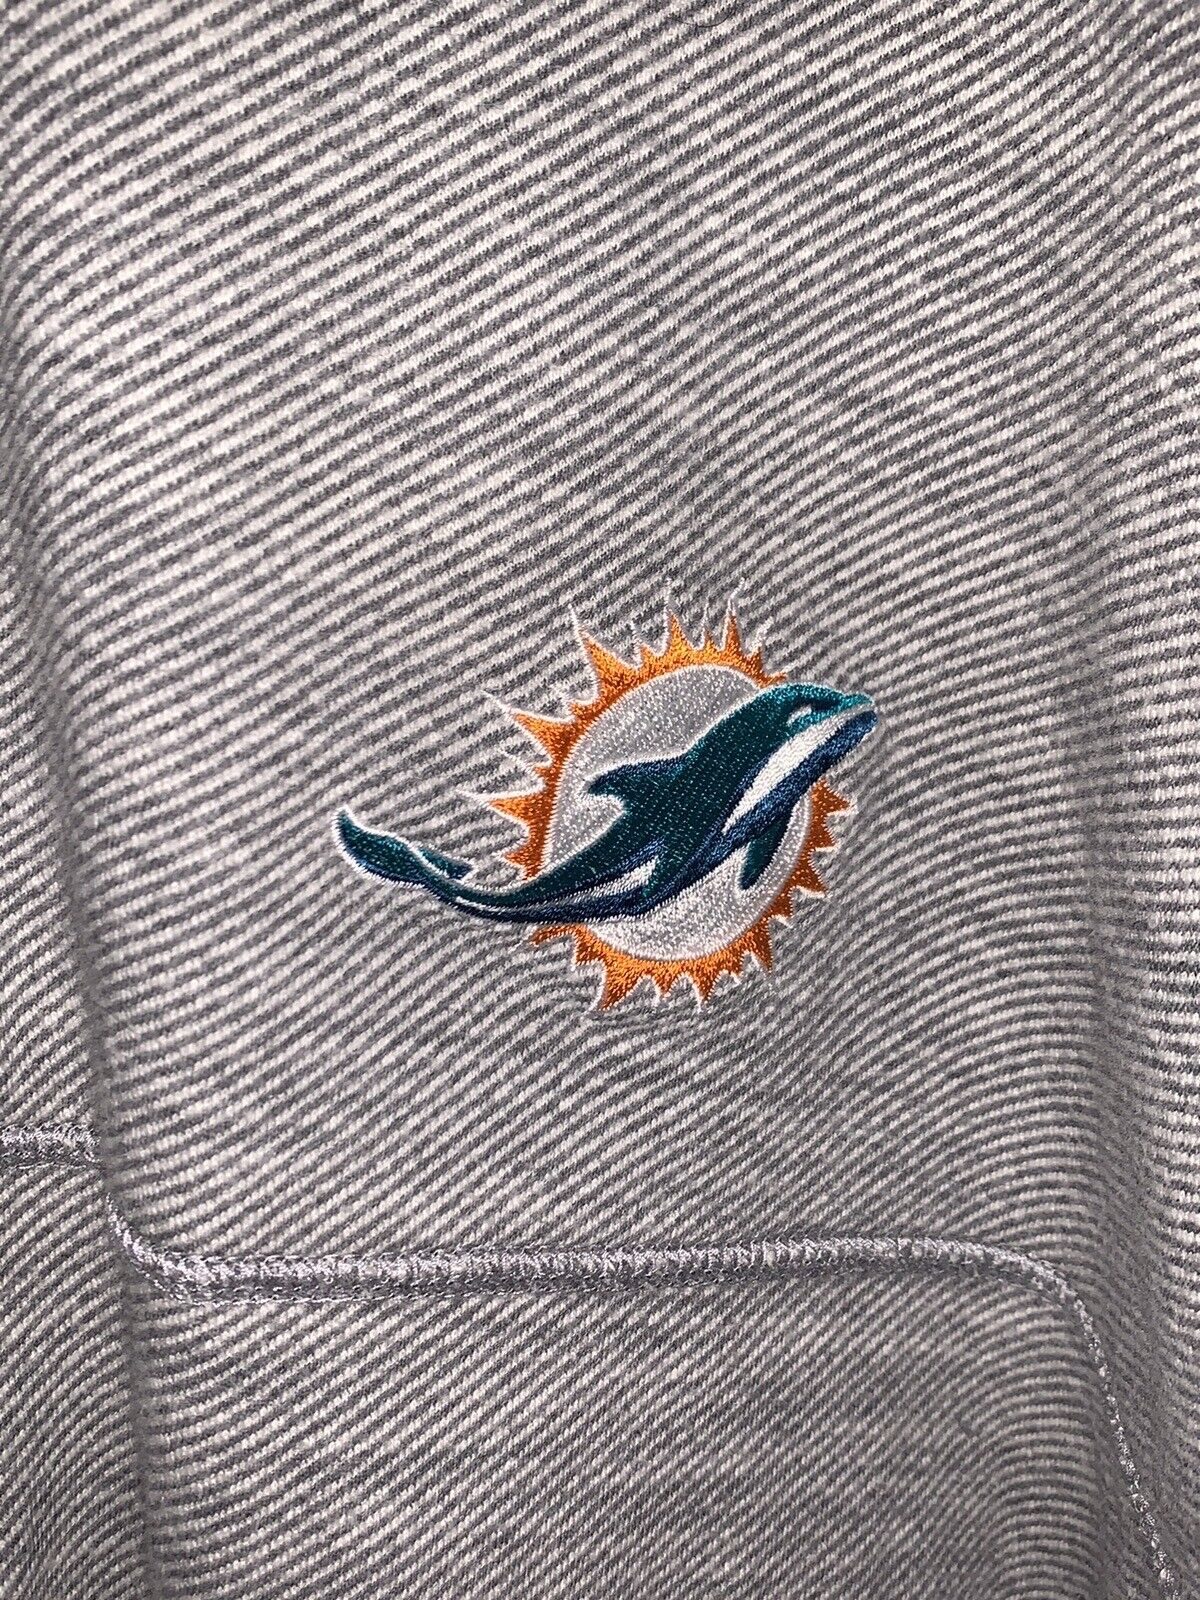 Tommy Bahama Miami Dolphins 1/4 Sweater Reversibl… - image 8